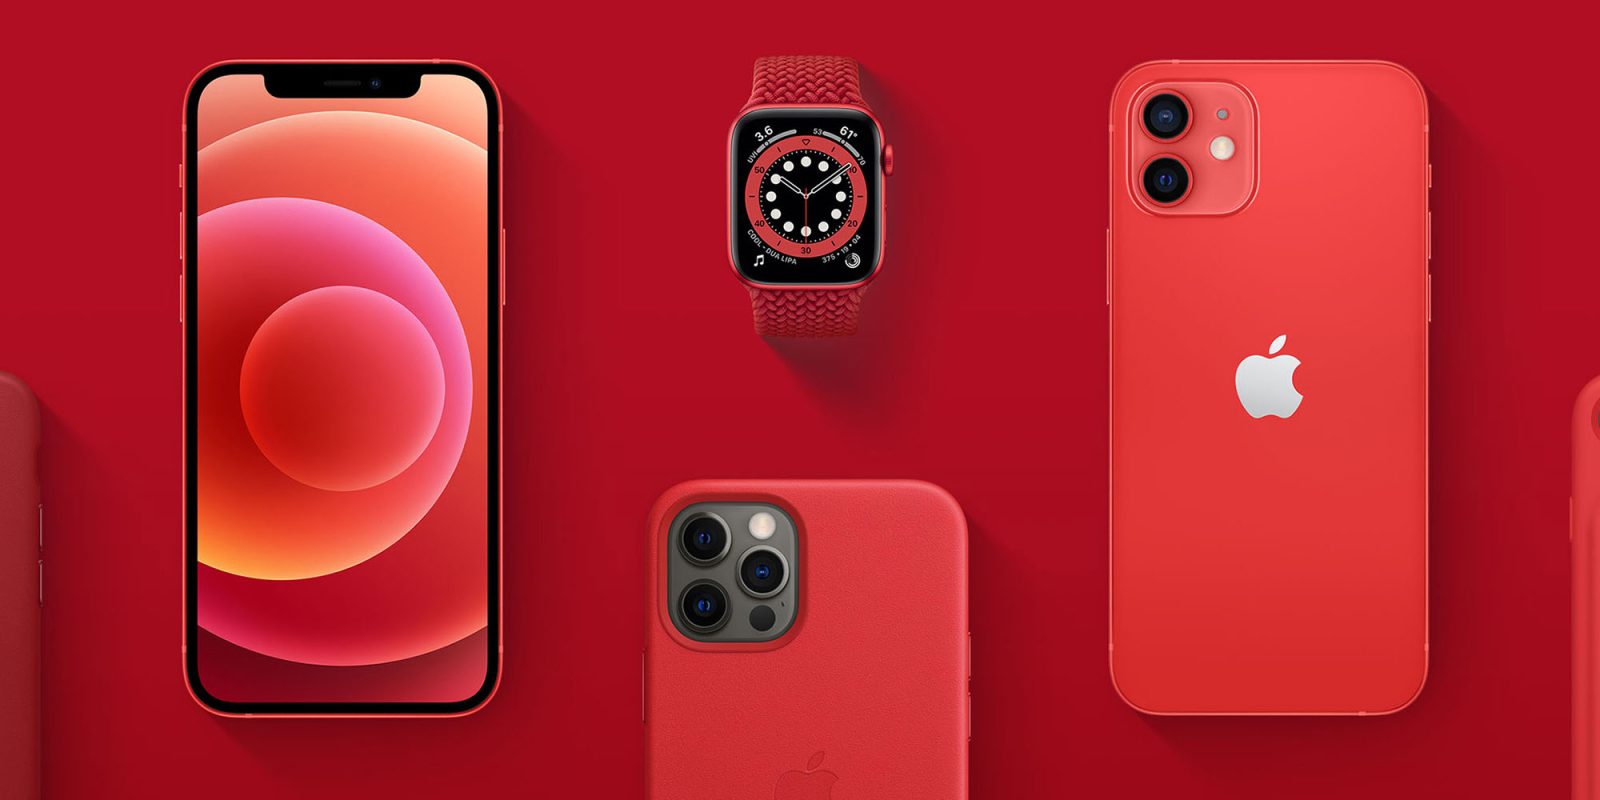 Possibility of ProMotion and always-on display in 2021 iPhone Pro models